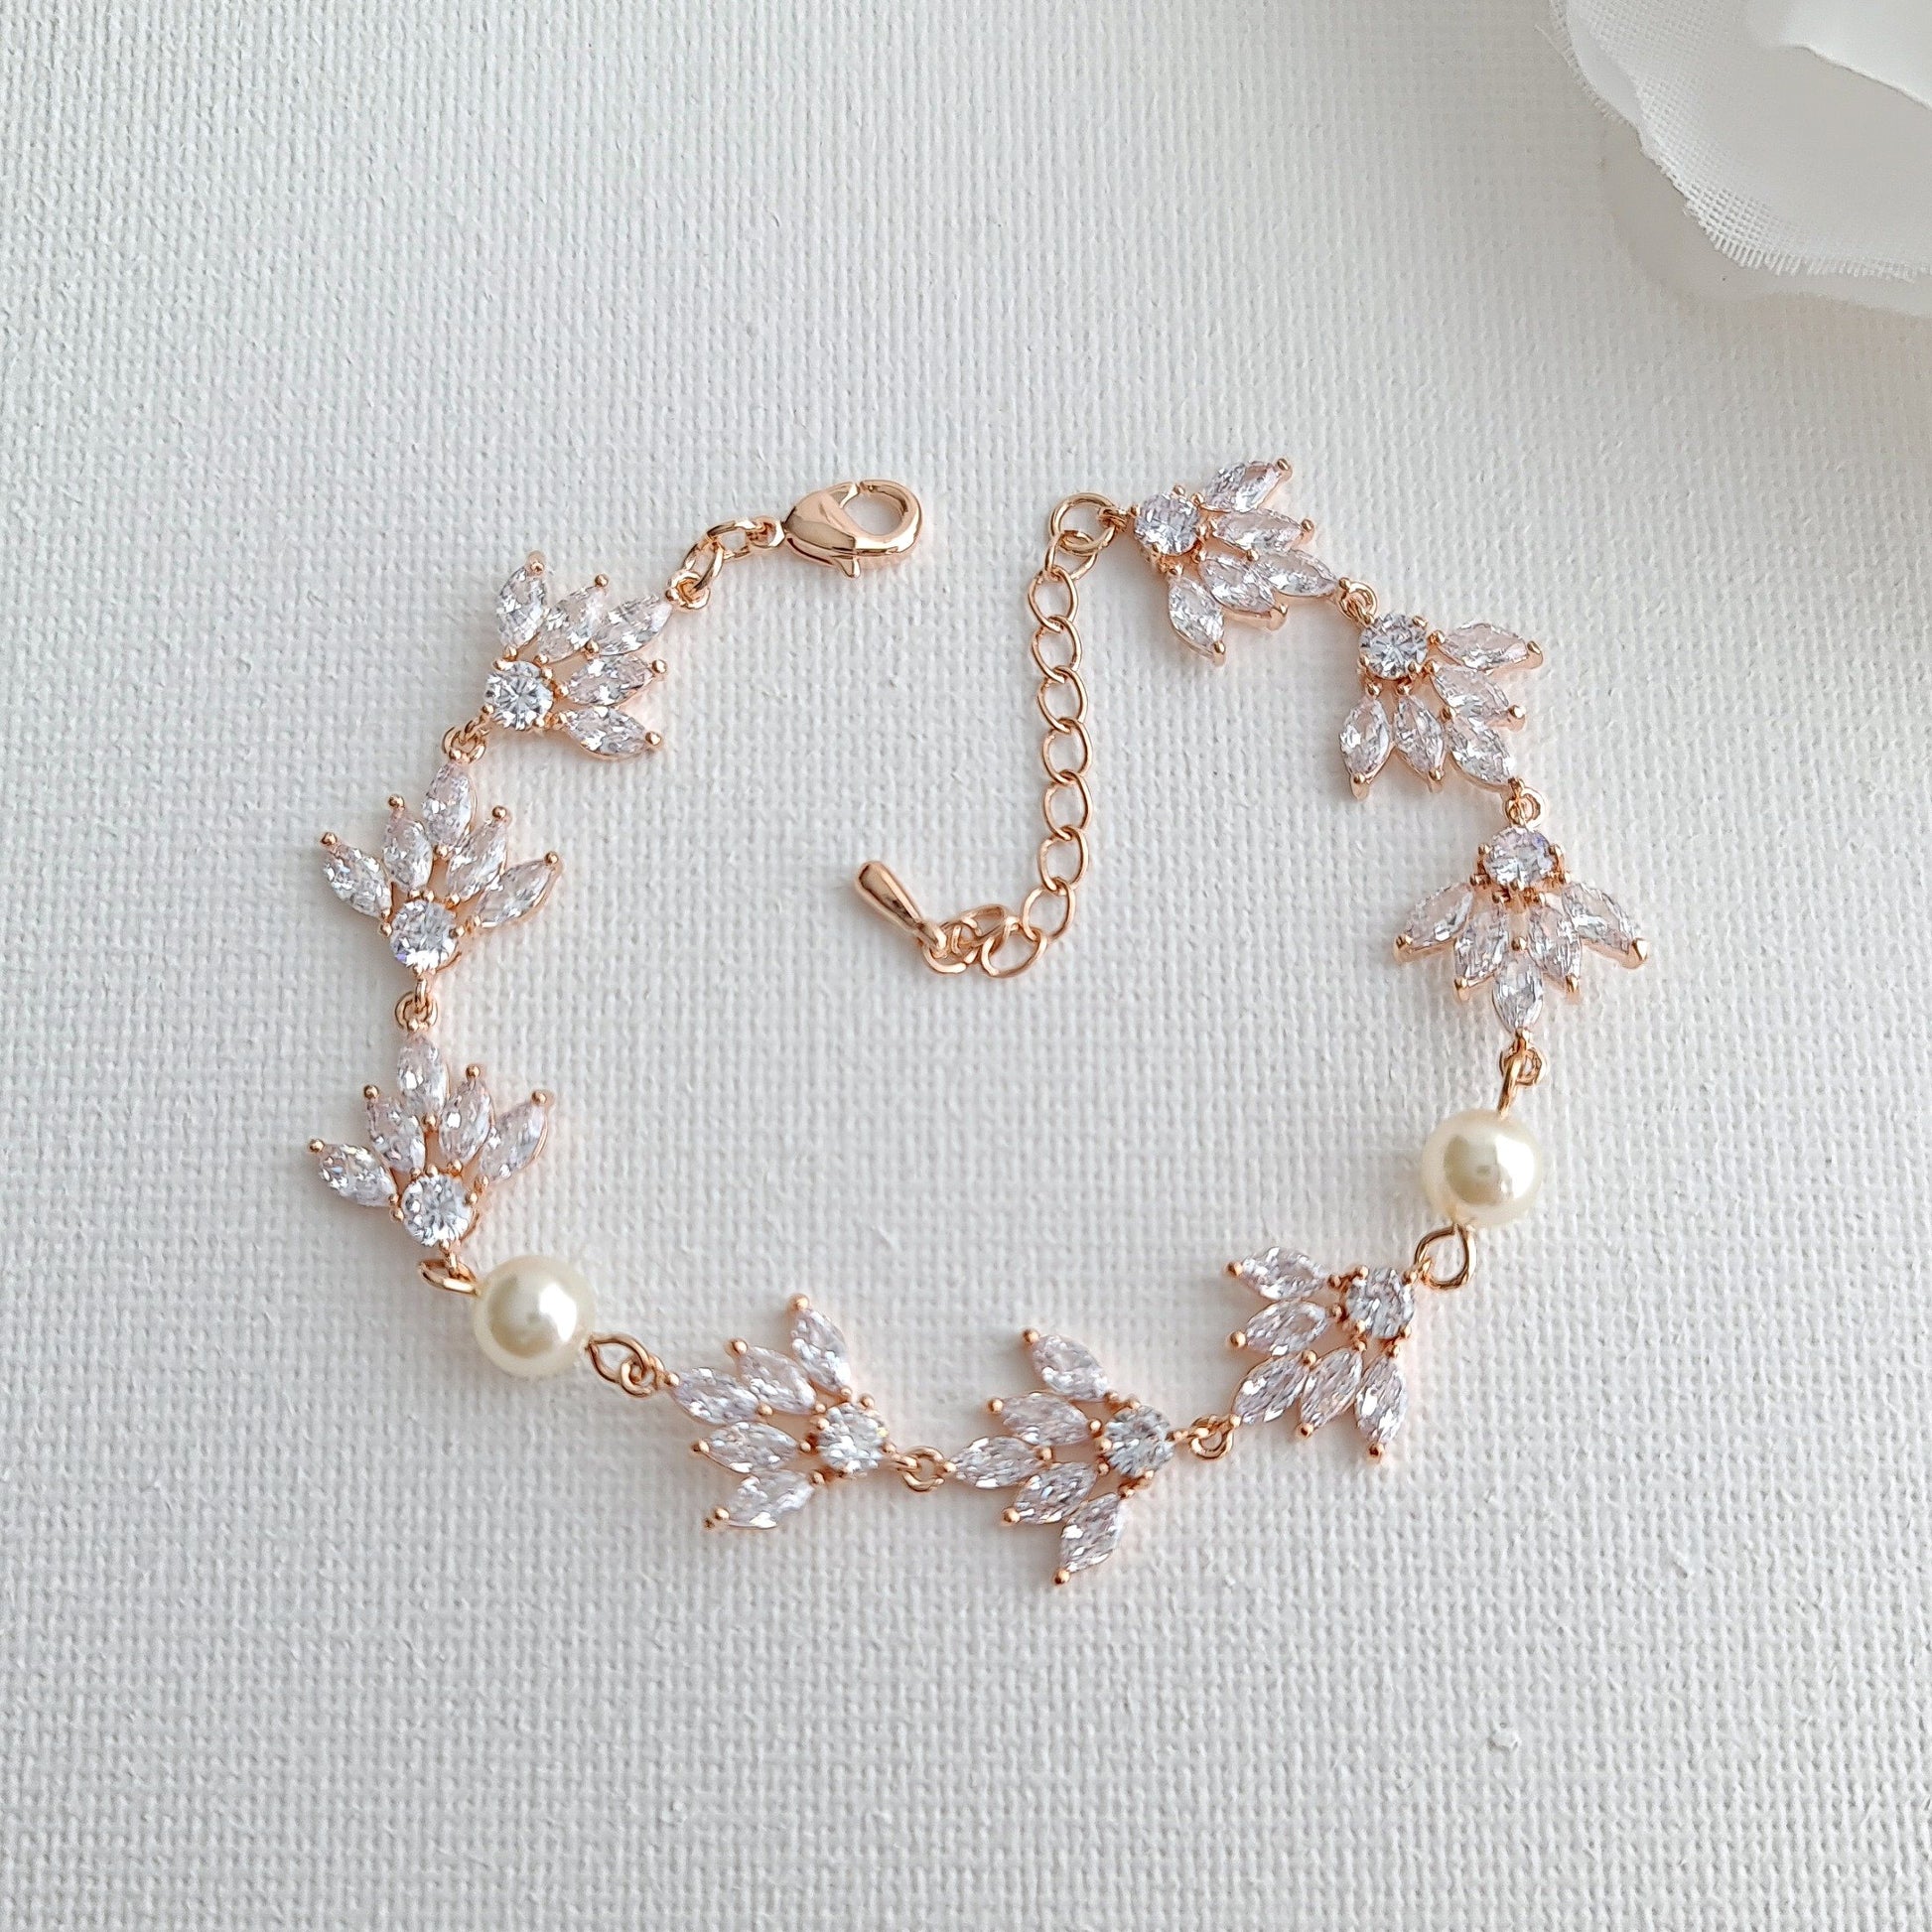 rose gold bracelet for the wedding jewelry set- Poetry Designs